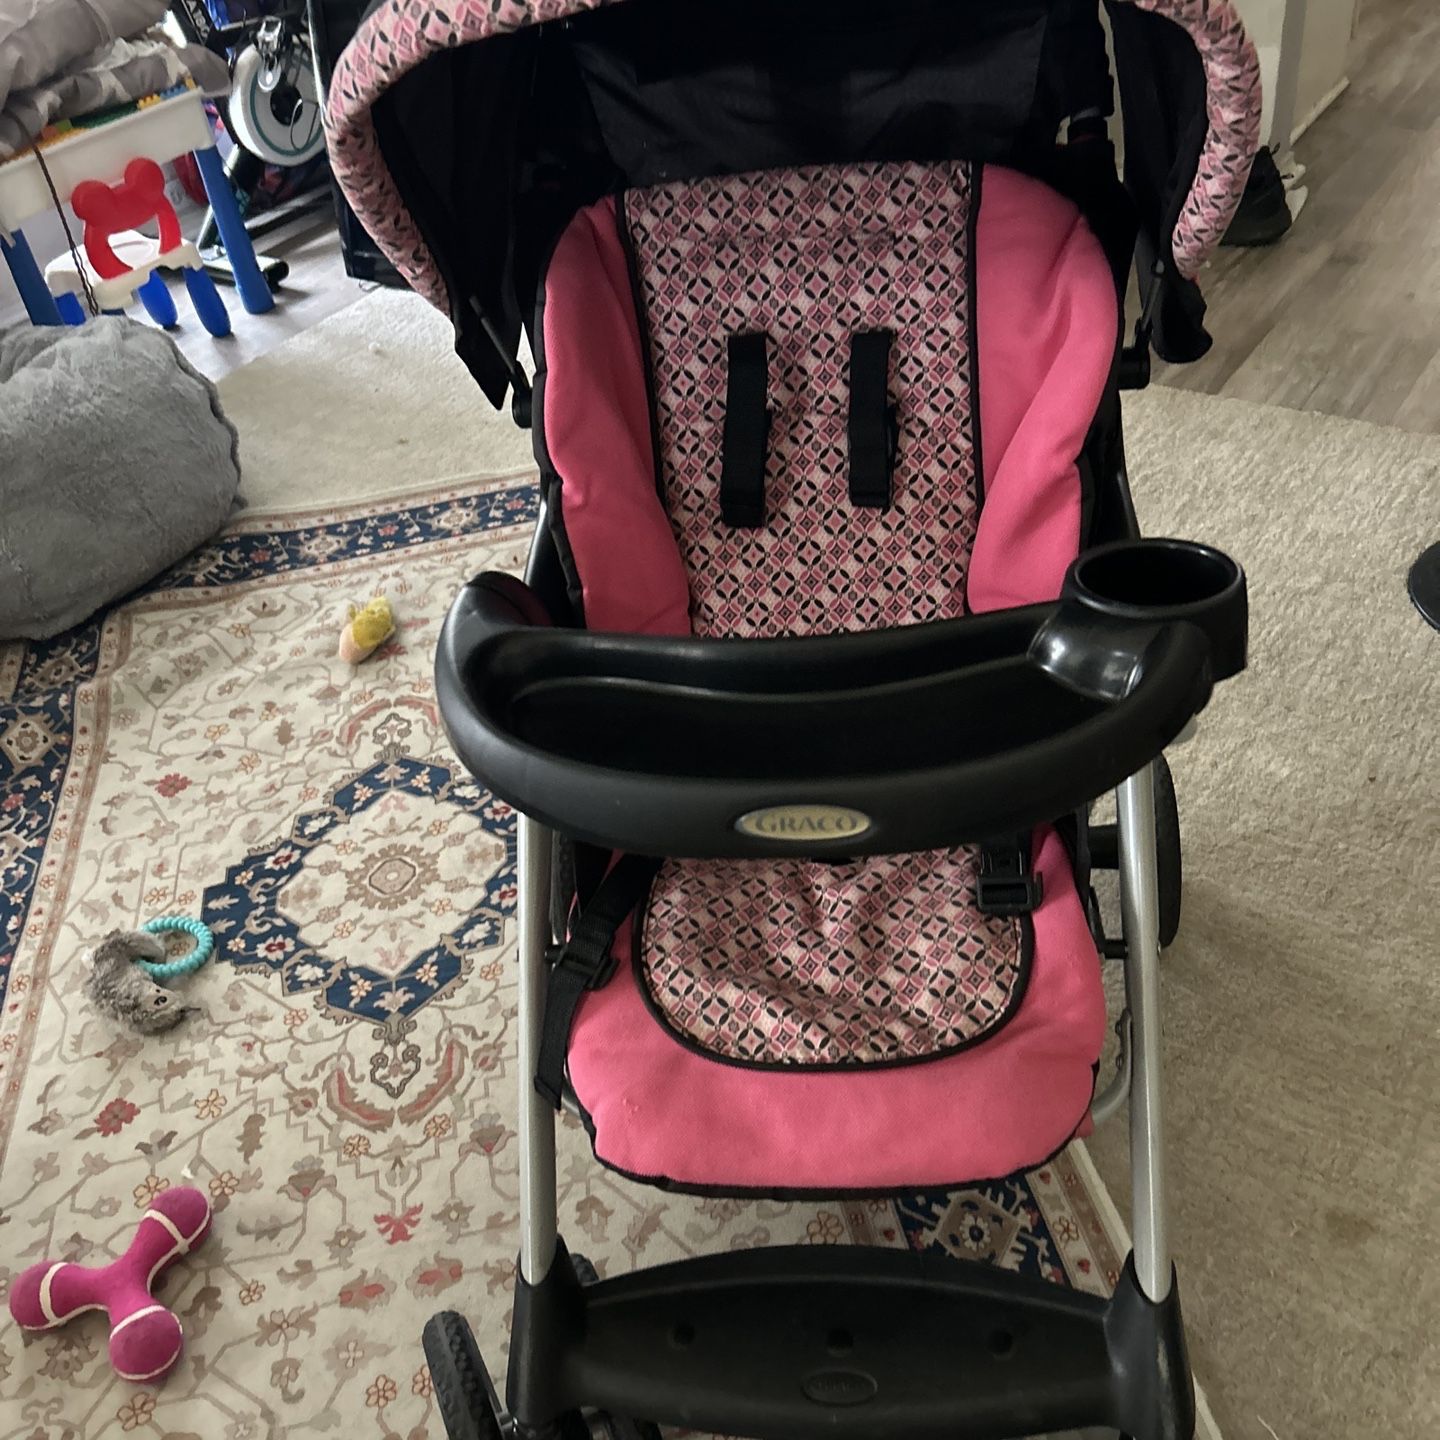 Graco Baby Stroller With Pulldown Sunshade